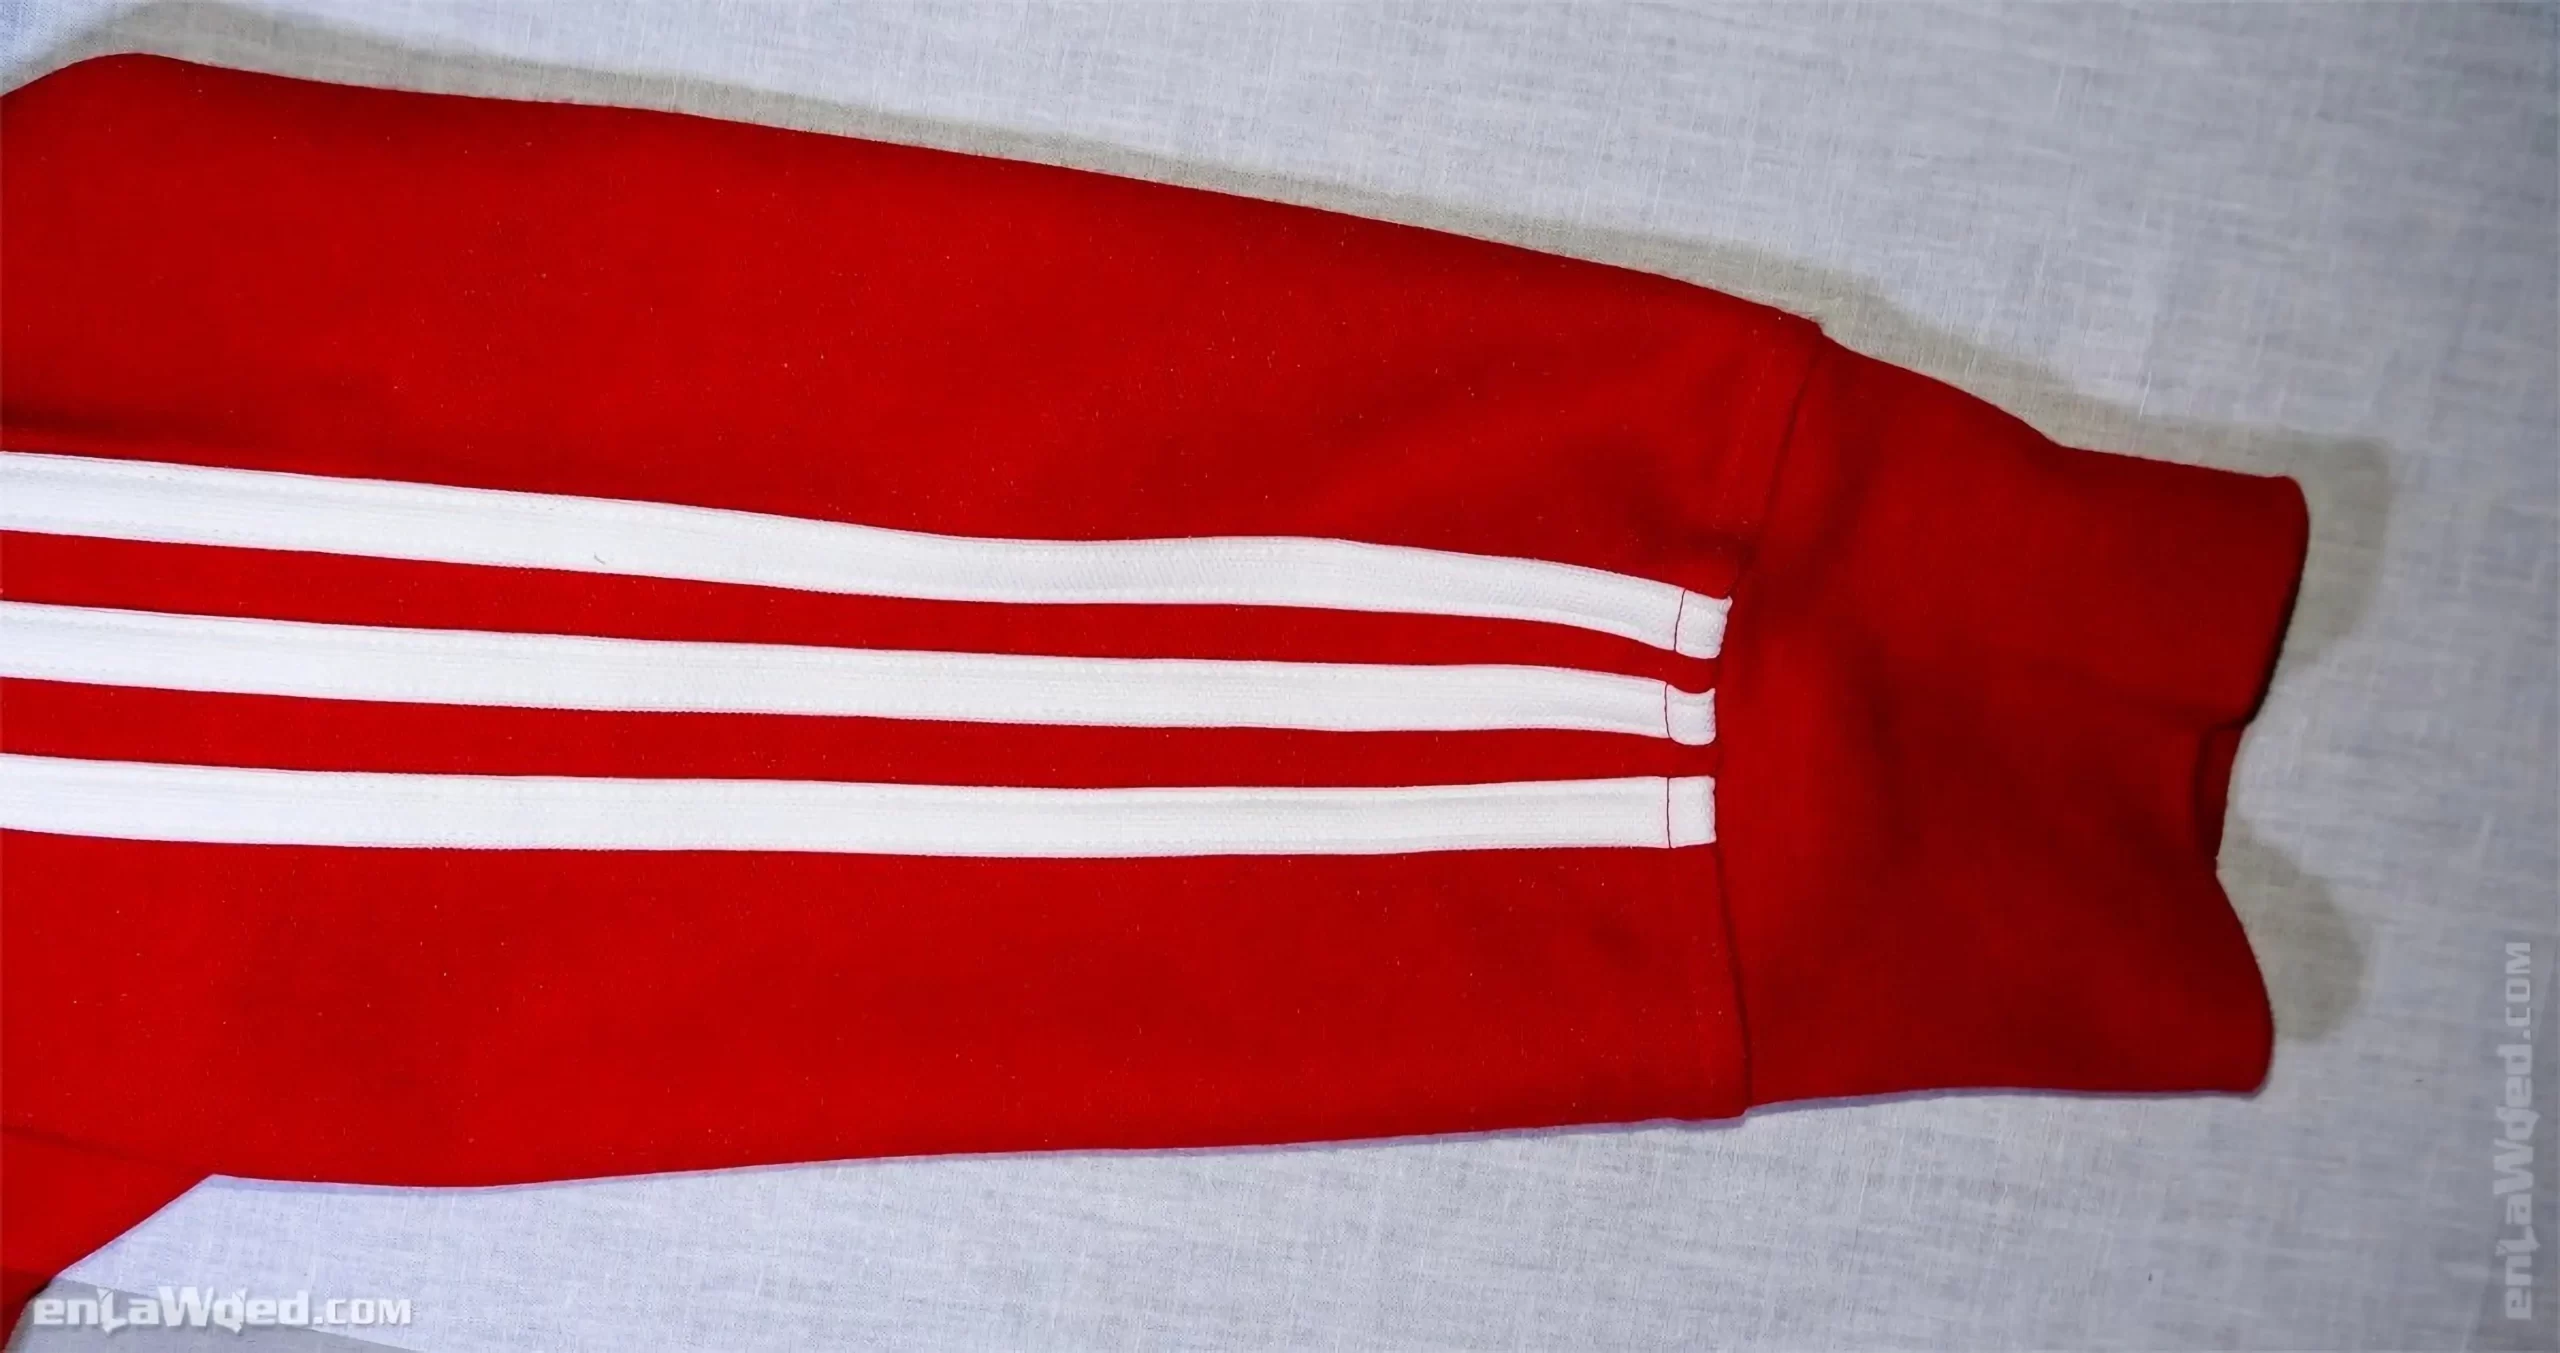 Men’s 2007 Slovakia Love Track Top by Adidas Originals: Uncovered (EnLawded.com file #lmcgfj95qtr5odelf2)